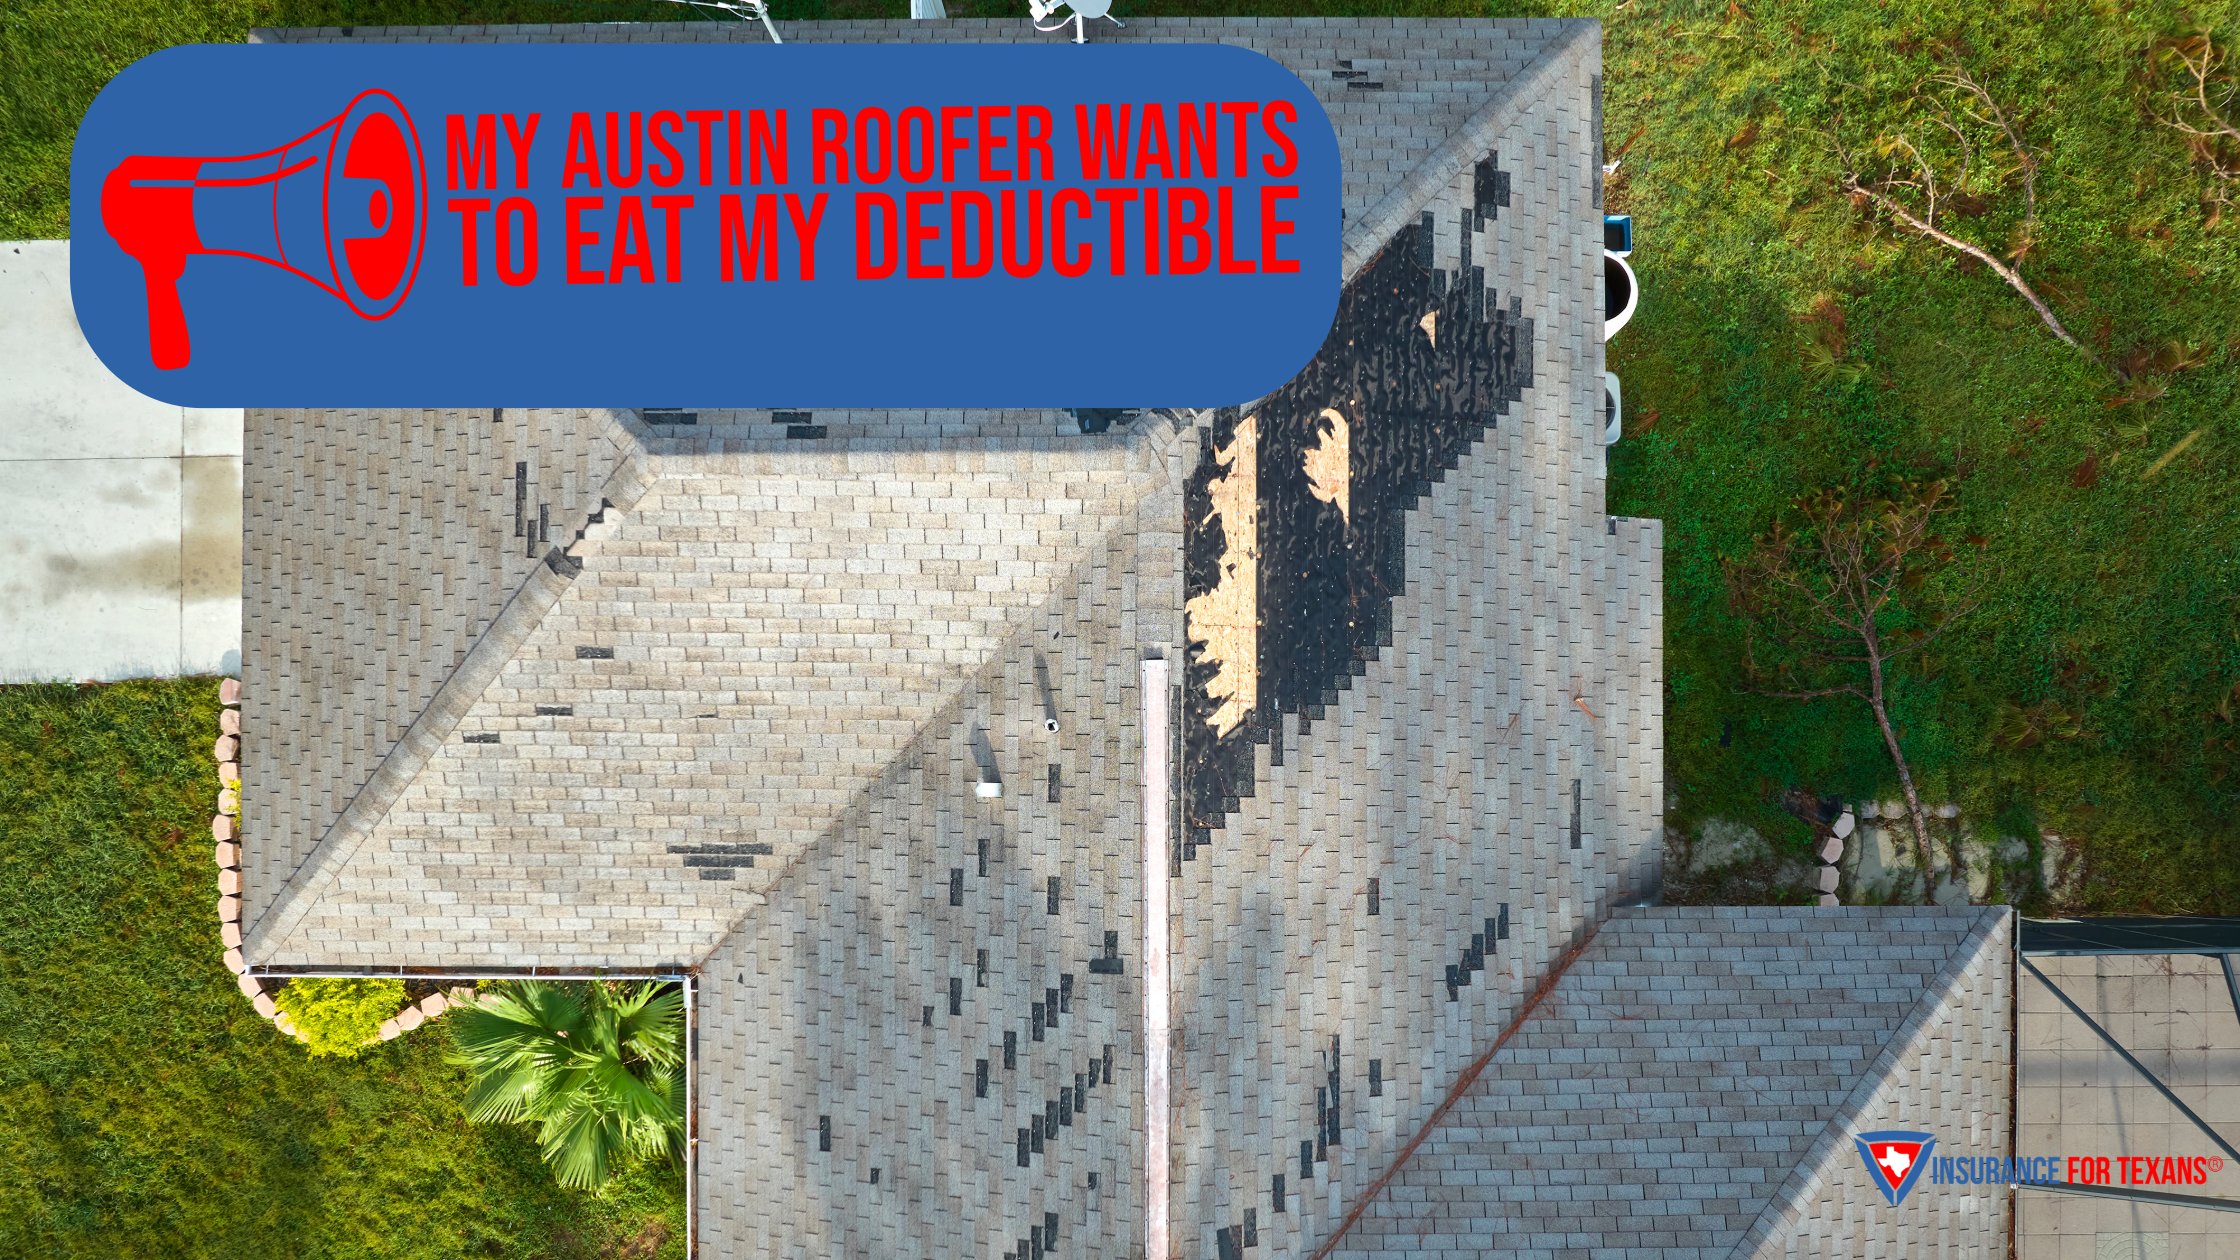 My Austin Roofer Wants to Eat My Deductible